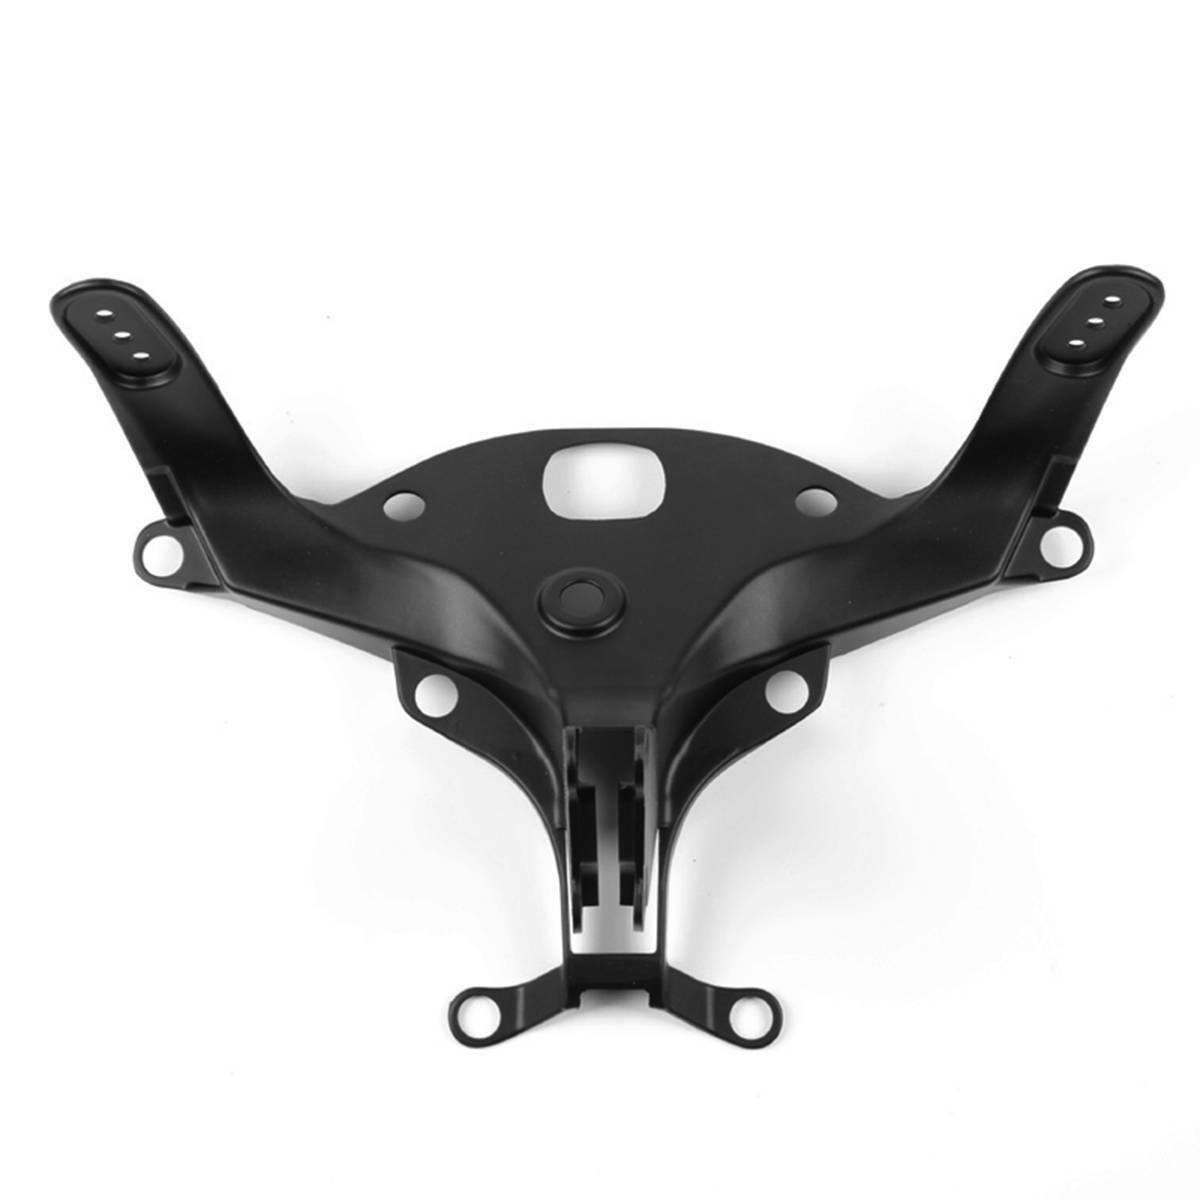 Upper Stay Fairing Headlight Bracket Fit For YAMAHA YZF R1 YZF-R1 04-06 Black US - Moto Life Products